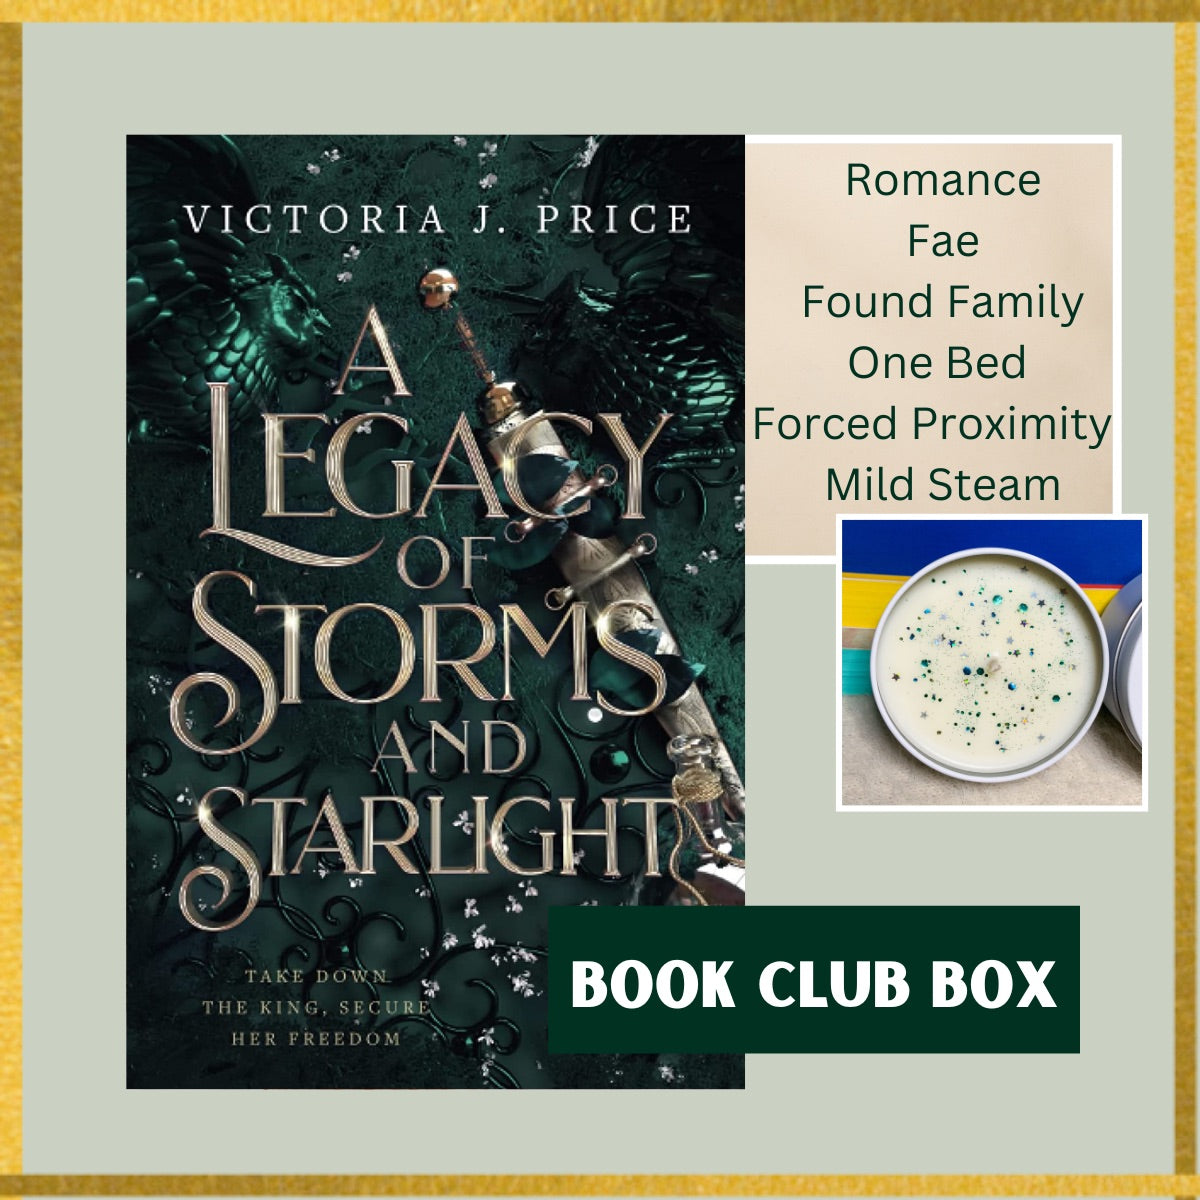 A Legacy of Storms and Starlight Book Club Box